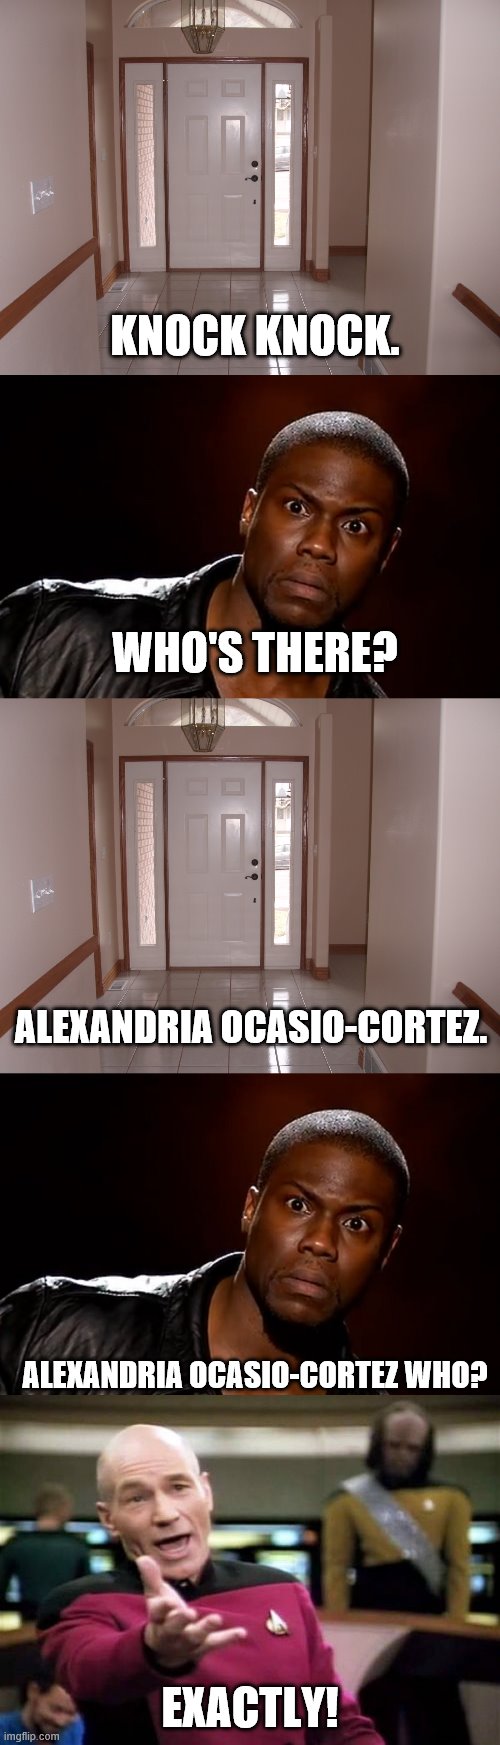 What's the diagnosis on her? | KNOCK KNOCK. WHO'S THERE? ALEXANDRIA OCASIO-CORTEZ. ALEXANDRIA OCASIO-CORTEZ WHO? EXACTLY! | image tagged in picard wtf,kevin hart the hell,alexandria ocasio-cortez,stupid liberals,knock knock | made w/ Imgflip meme maker